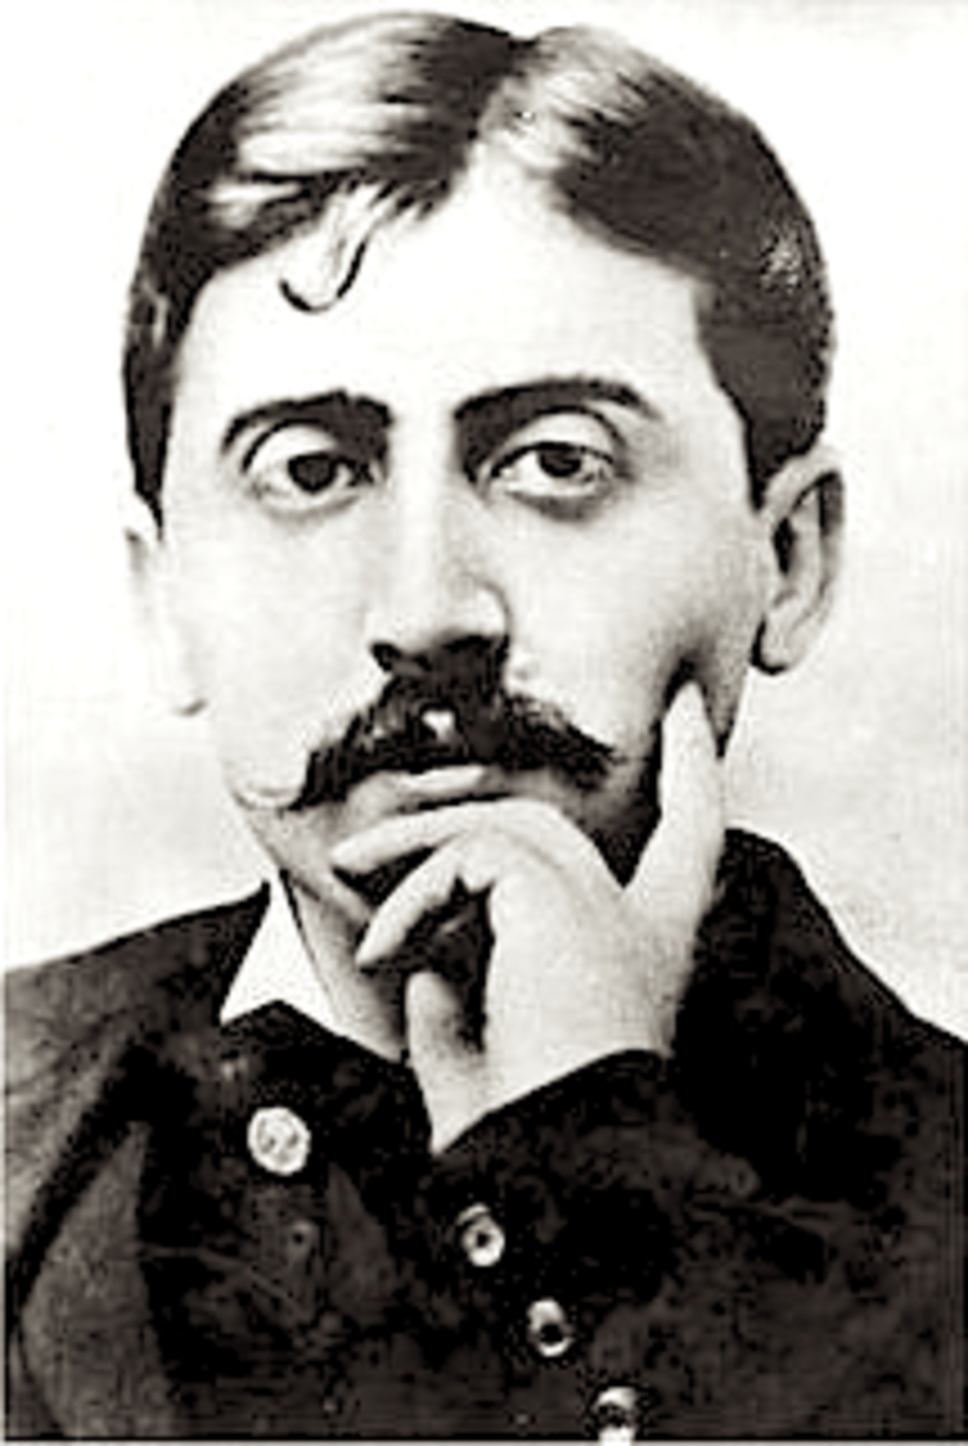 The Open Book: Marcel Proust